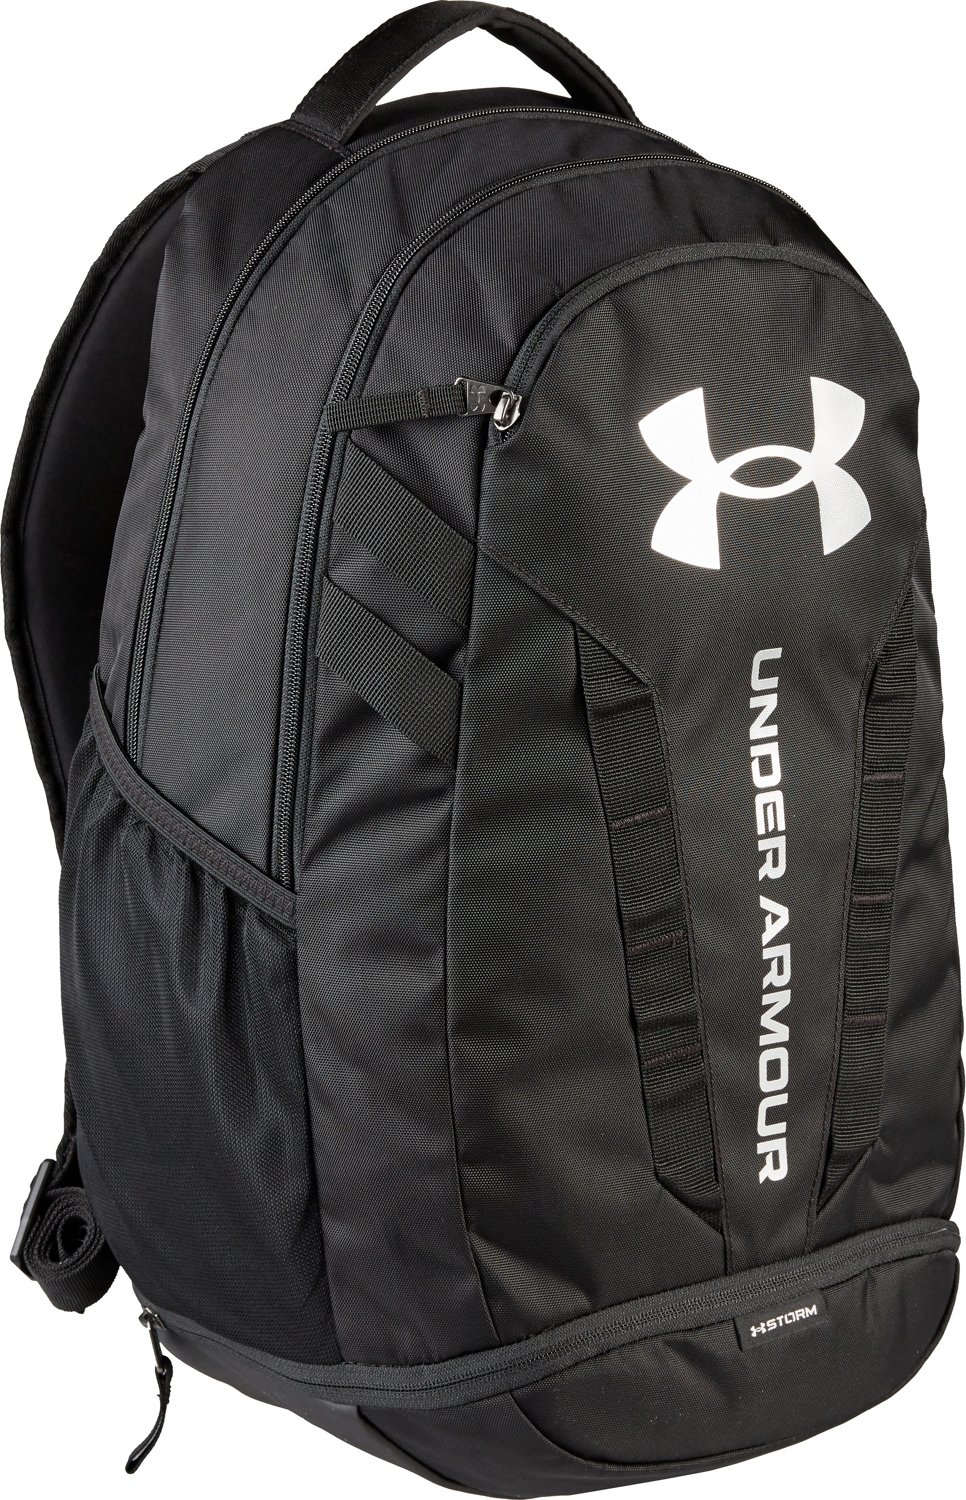 Under Armour Hustle 5.0 Backpack | Free Shipping at Academy